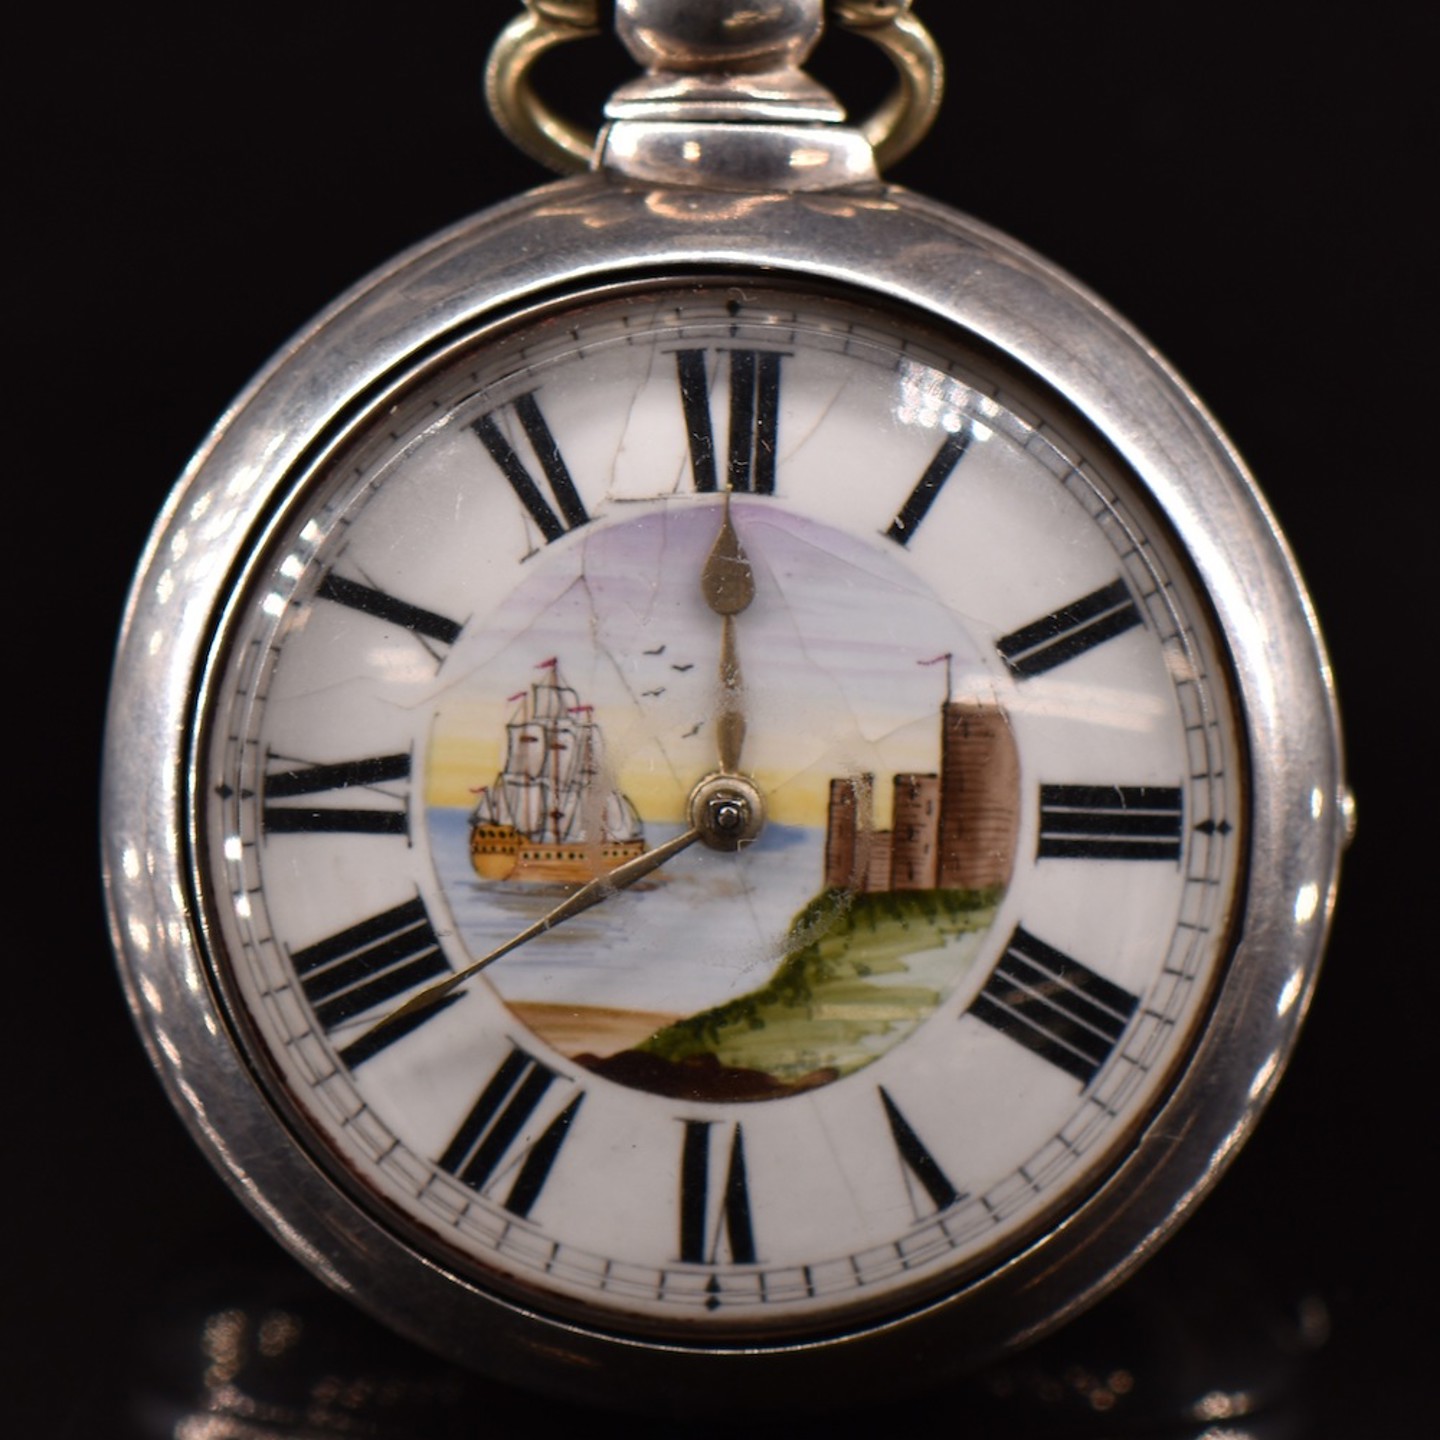 Edward Wilkins Of Newport Isle Of Wight Hallmarked Silver Pair Cased Open Faced Pocket Watch Sold £320